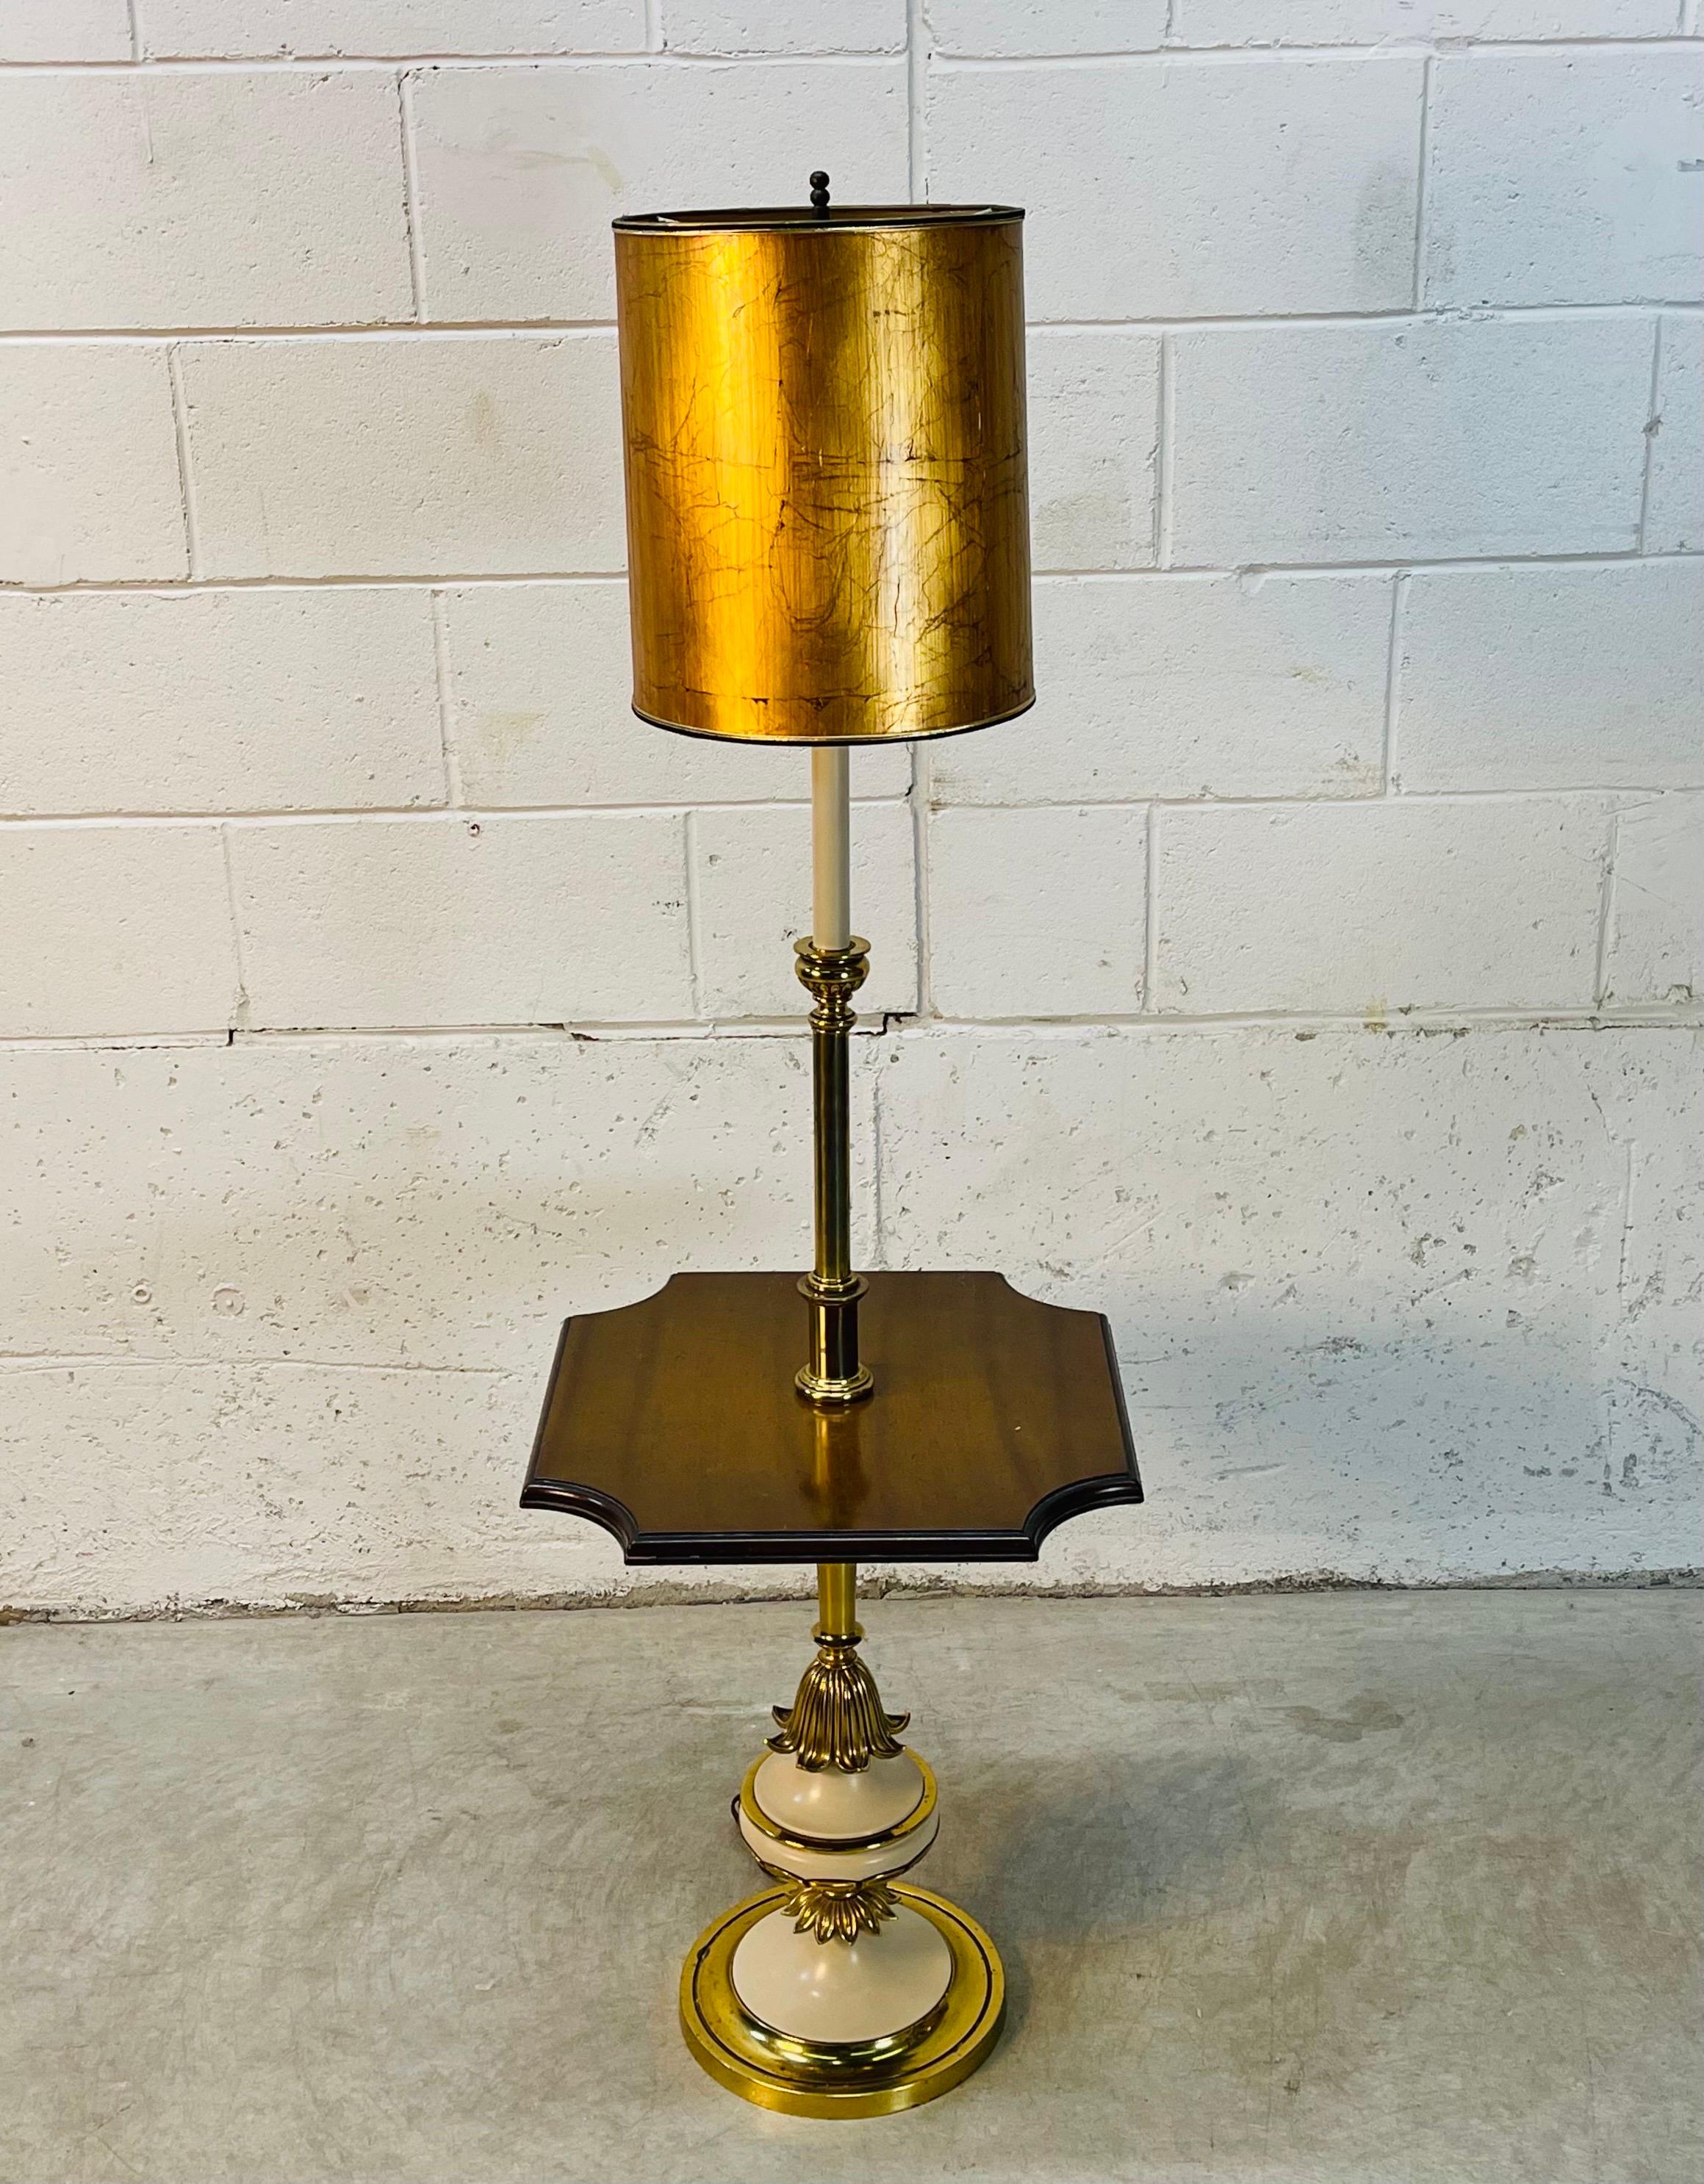 Vintage 1960s Stiffel floor lamp with gold matching shade. The lamp is made of painted metal and the table is a solid wood. The socket is 45” H. The harp is 4.5” Diameter x 8” Height. The shade is 10” Diameter x 12” Height. Wired for the US and in